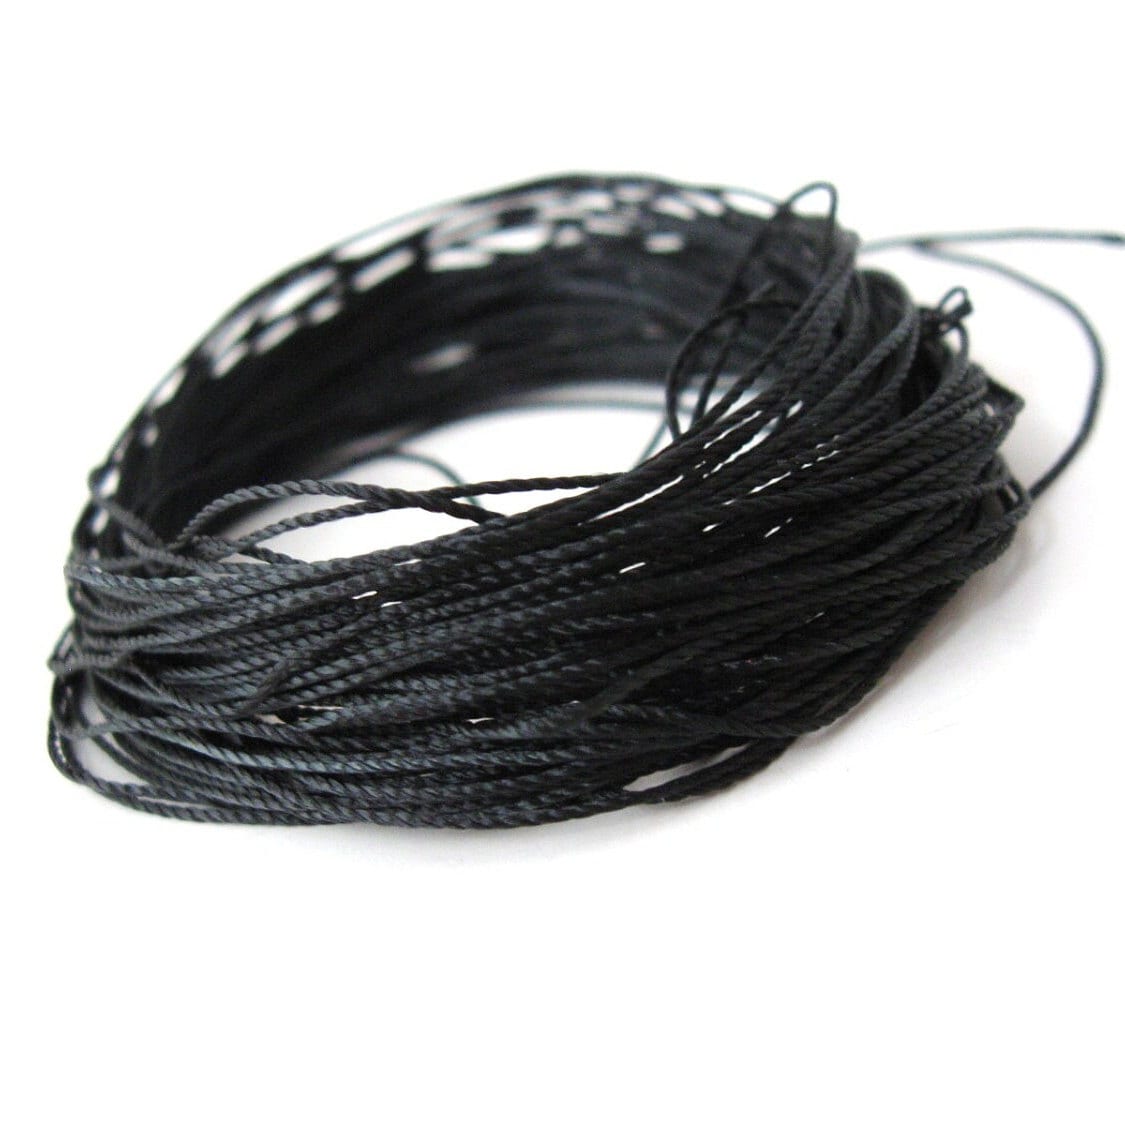 Waxed nylon cord 0.65mm - 20 meters / 65 ft - Black or Brown string for jewelry making